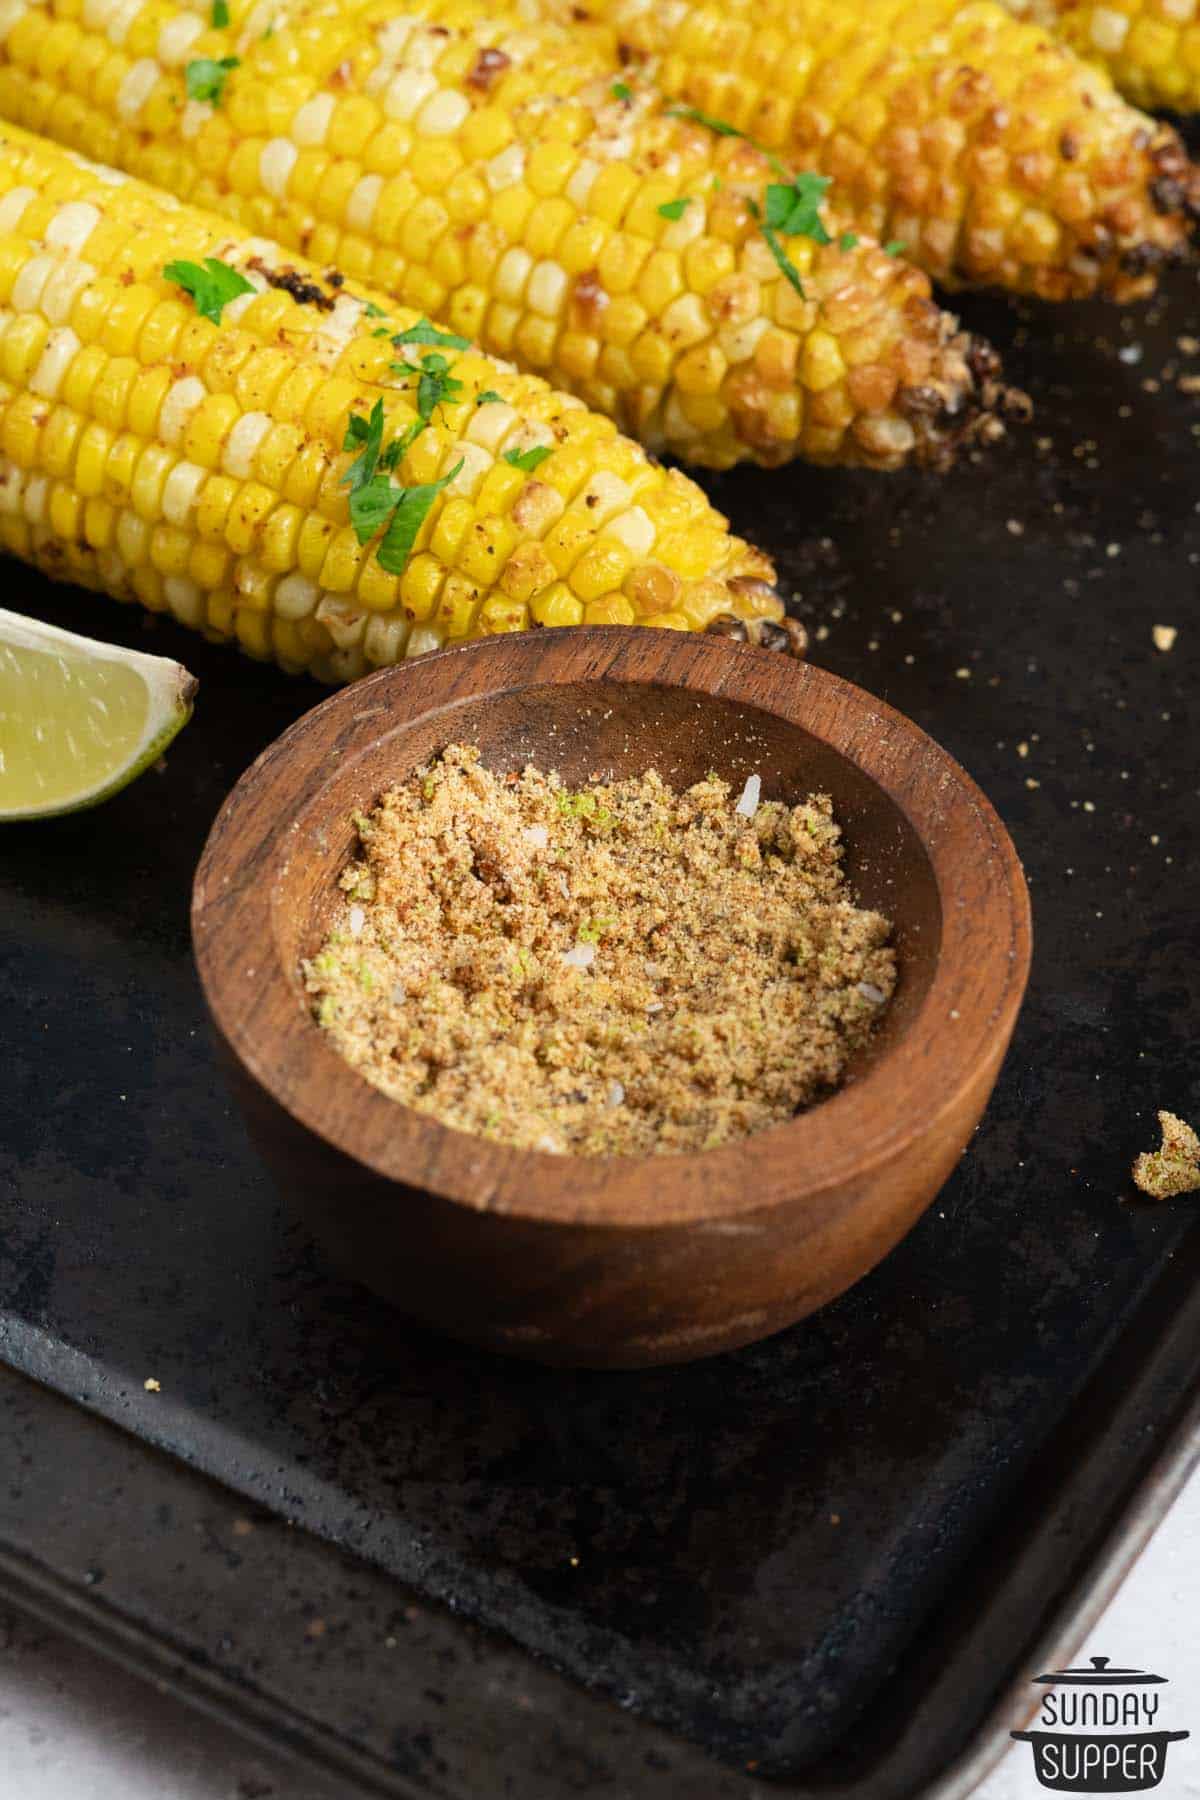 corn seasoning in a small bowl next to roasted corn on the cob